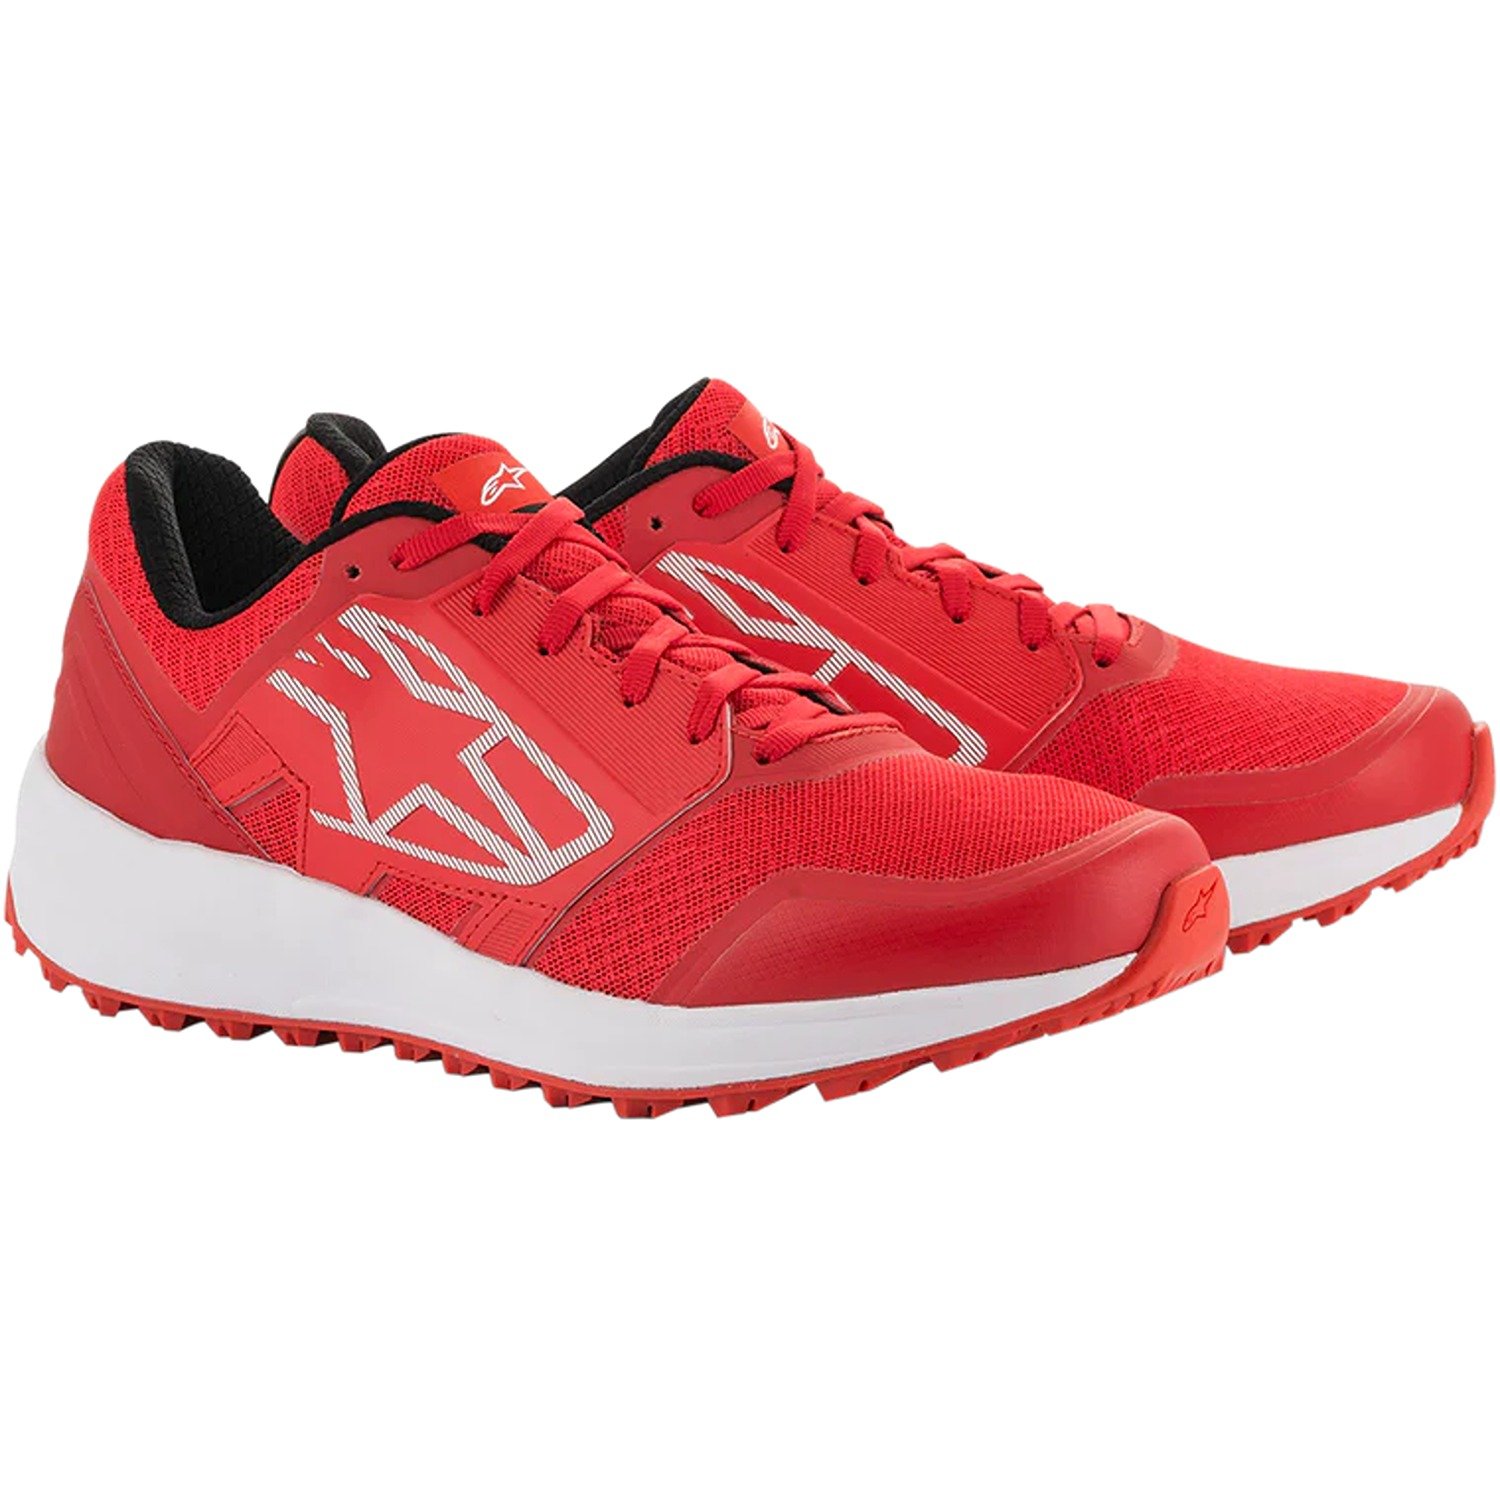 Image of EU Alpinestars Meta Trail Shoes Red White Taille US 65